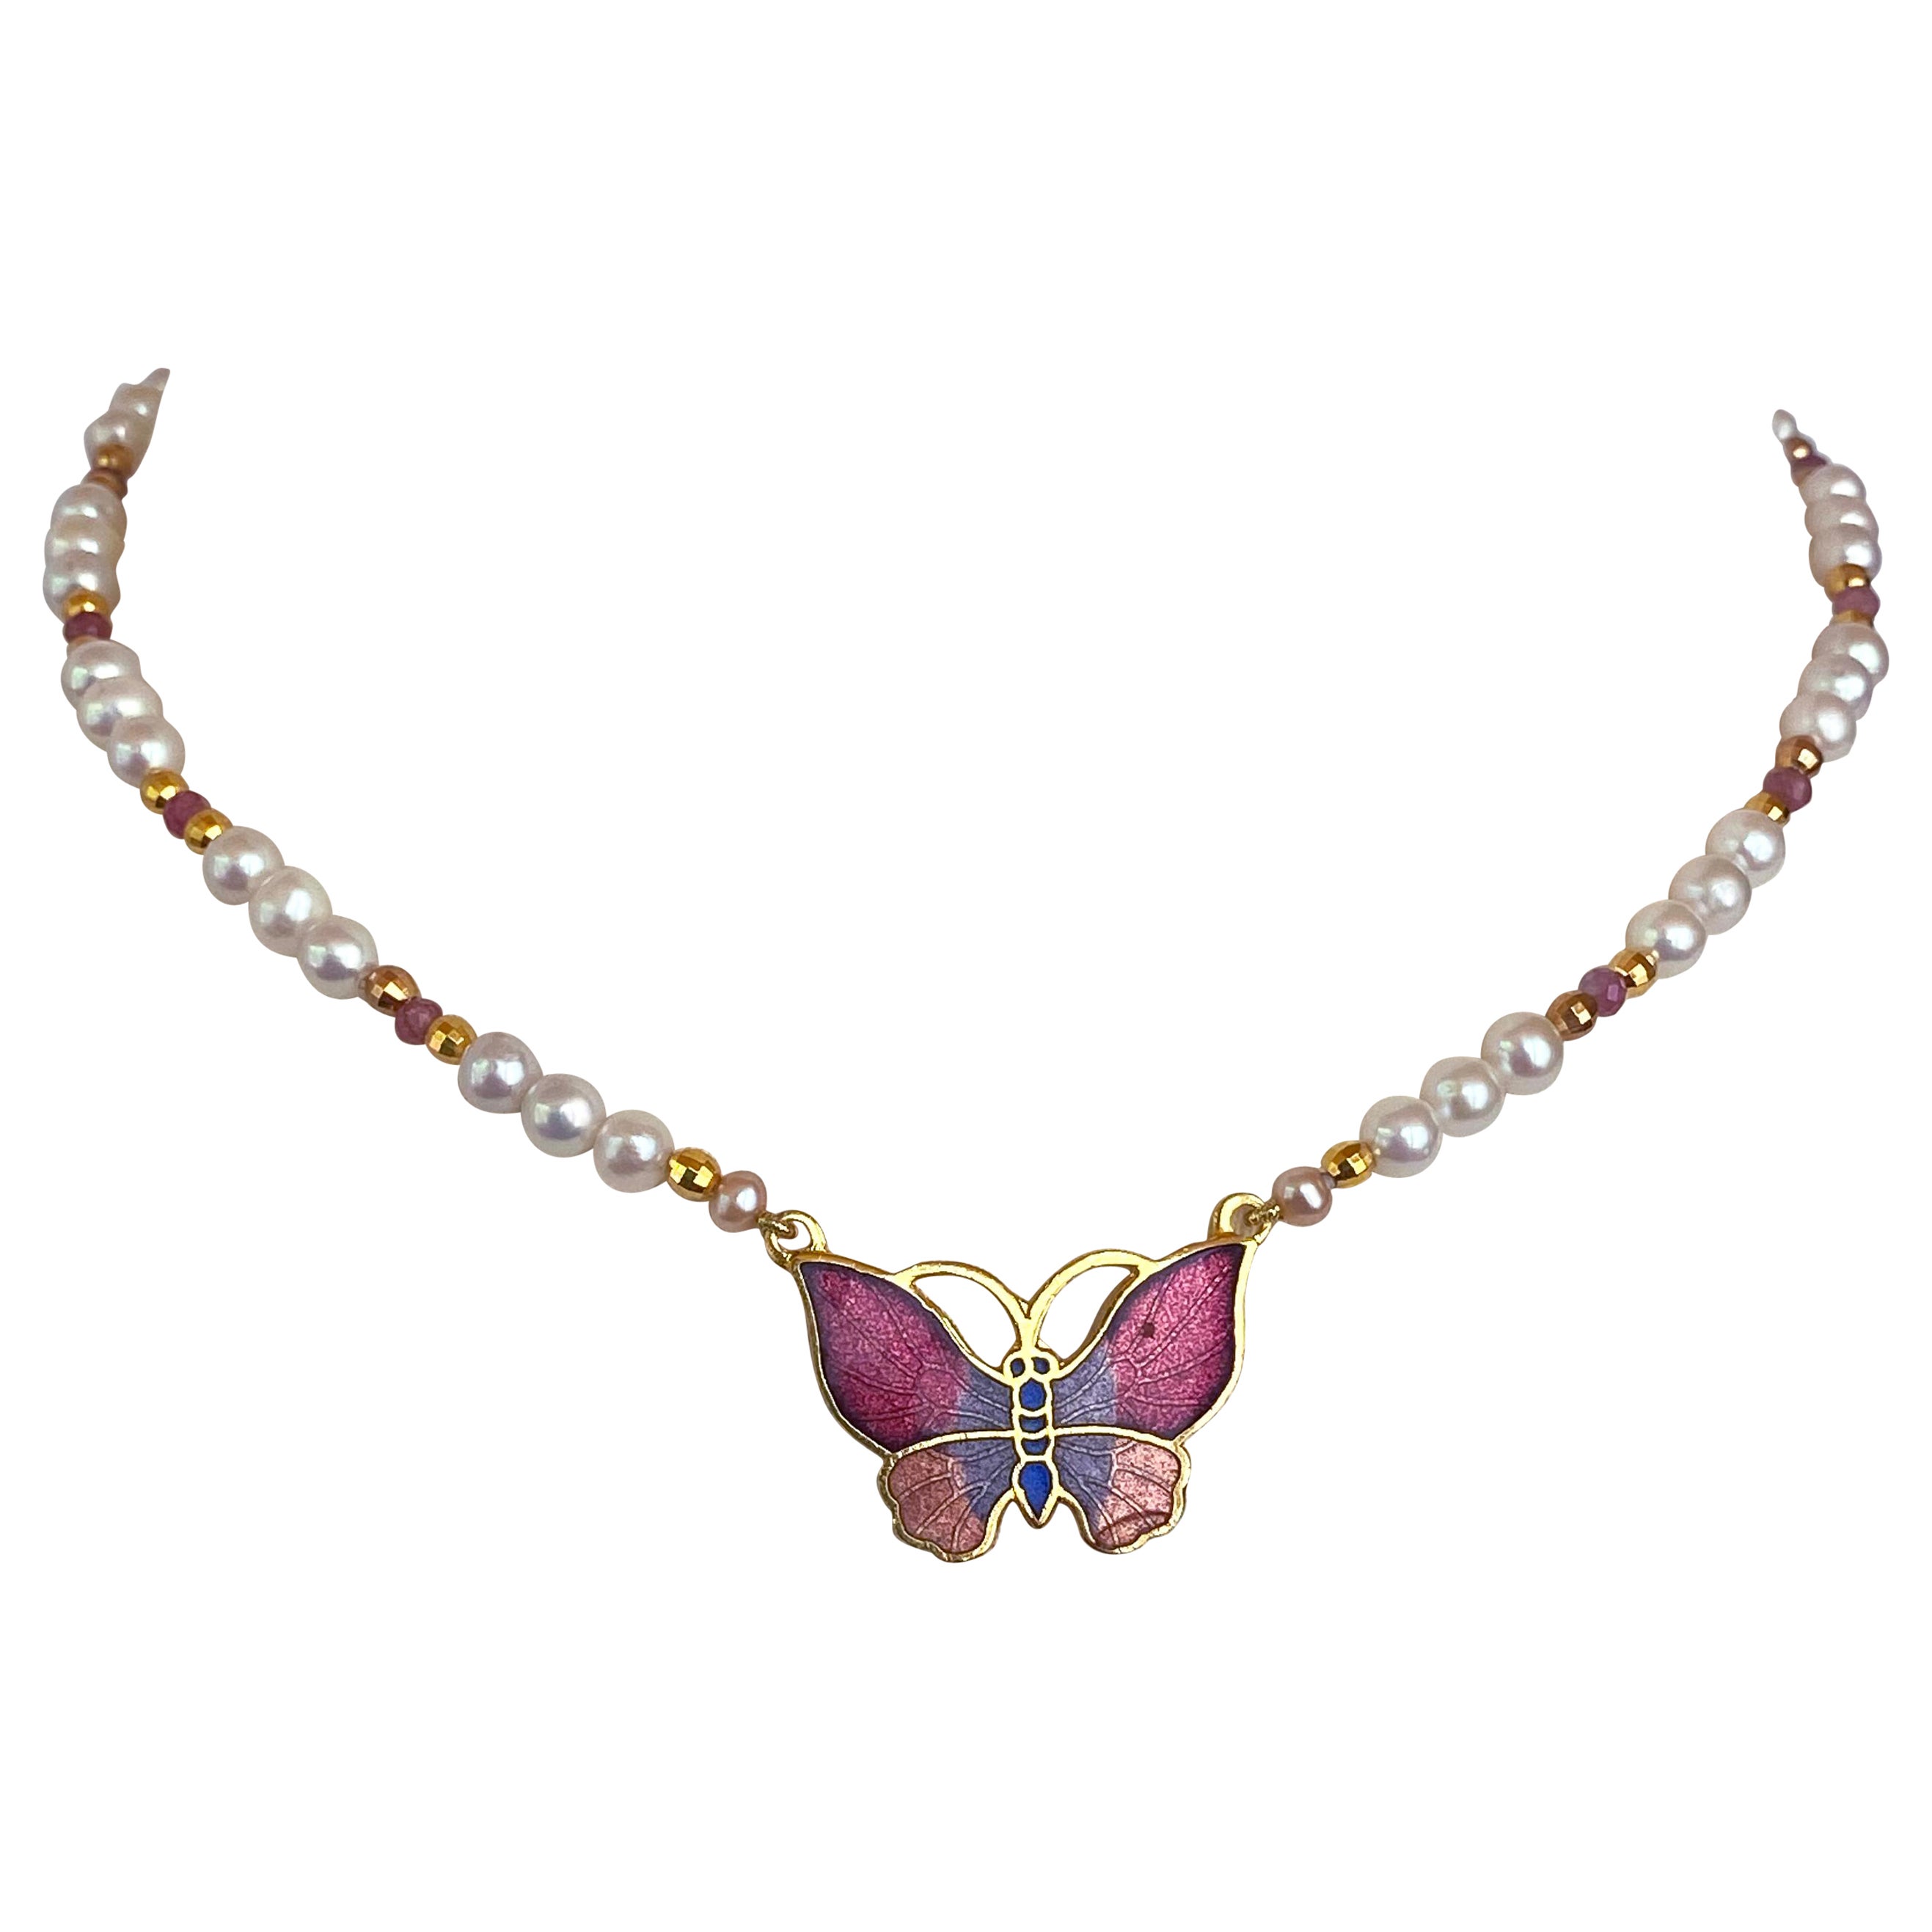 Marina J. For Girls! Pearl Necklace with Pink Rubies and Butterfly Brooch For Sale